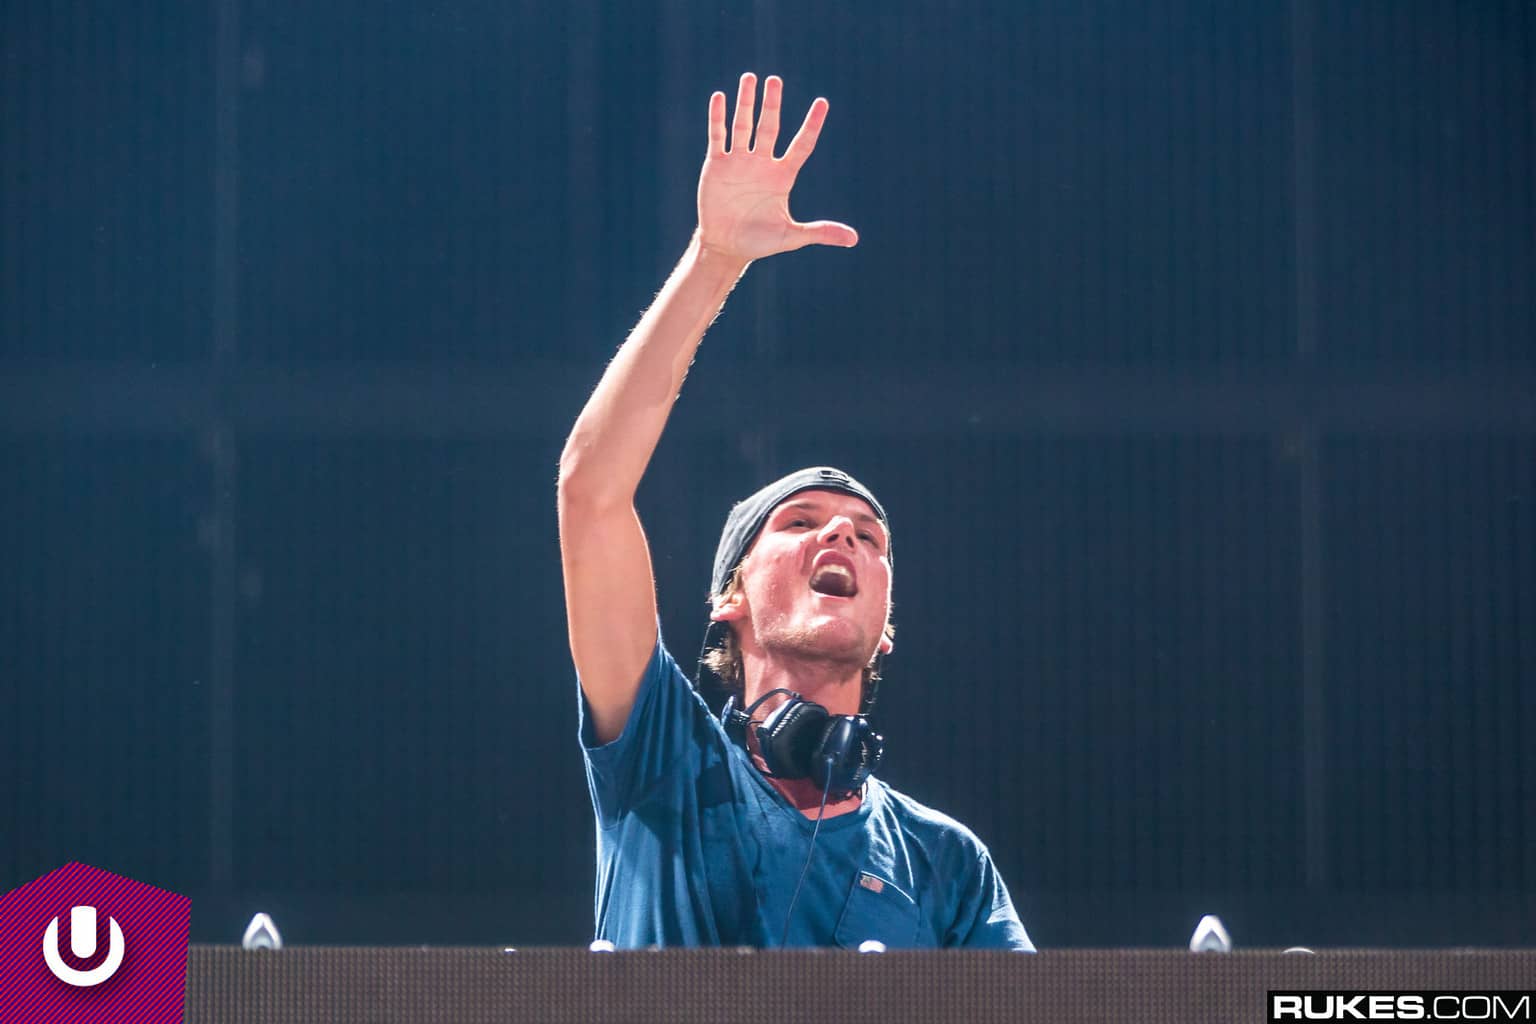 These Are The Best EDM Artists of All Time According to ChatGPT